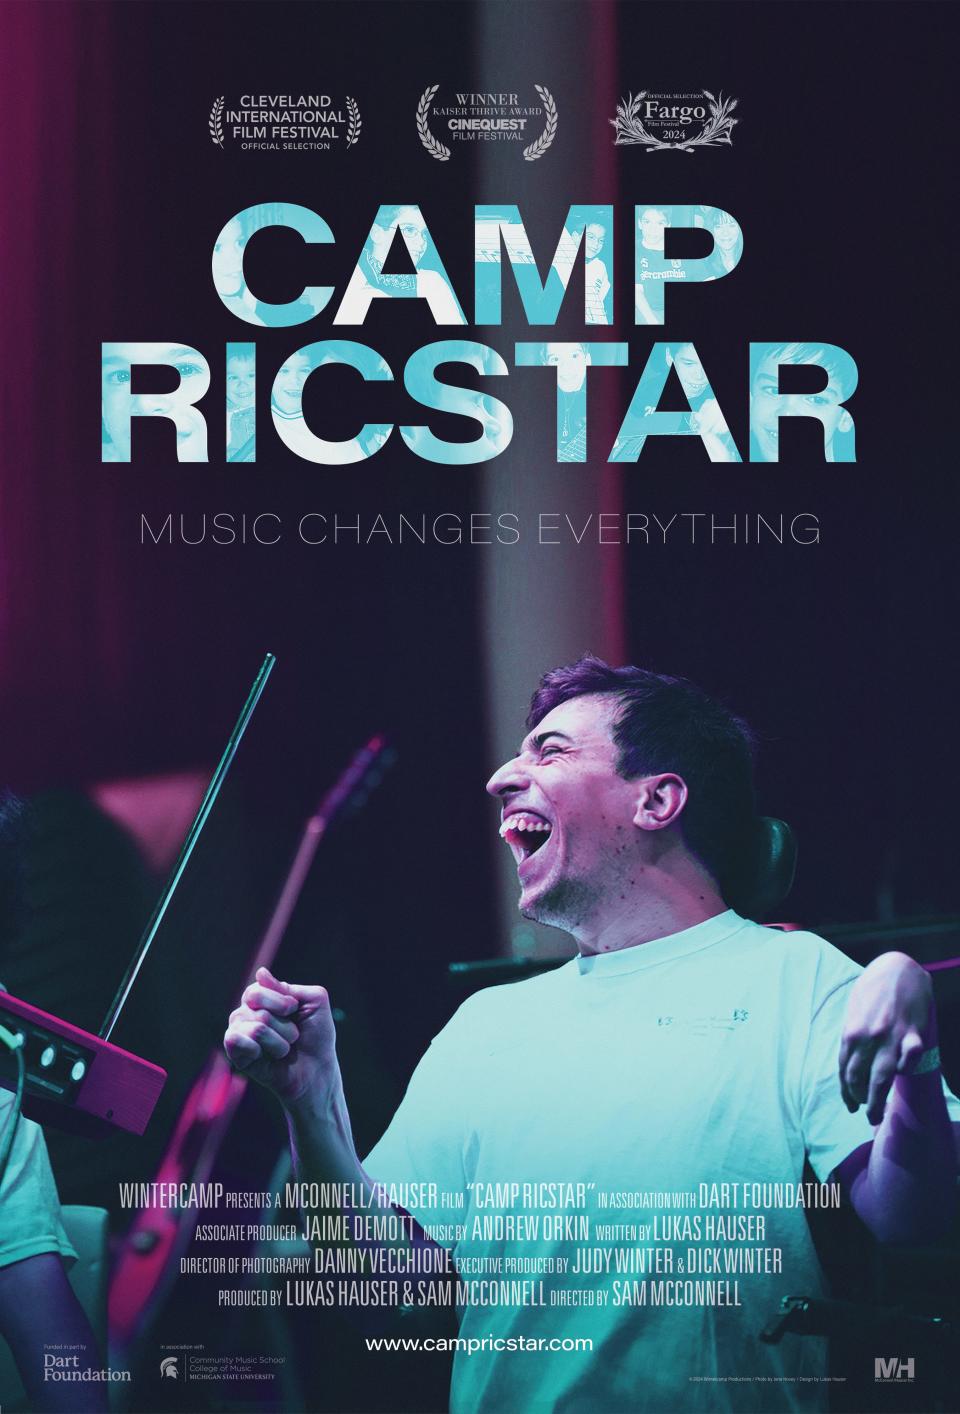 "CAMP RICSTAR," premieres at the Cinequest Film Festival in San Jose, California, on Friday. It will be featured locally at the Capital City Film Festival on April 10. It has already been named the Kaiser Permanente Thrive Award Winner for this year's Cinequest Film Festival.